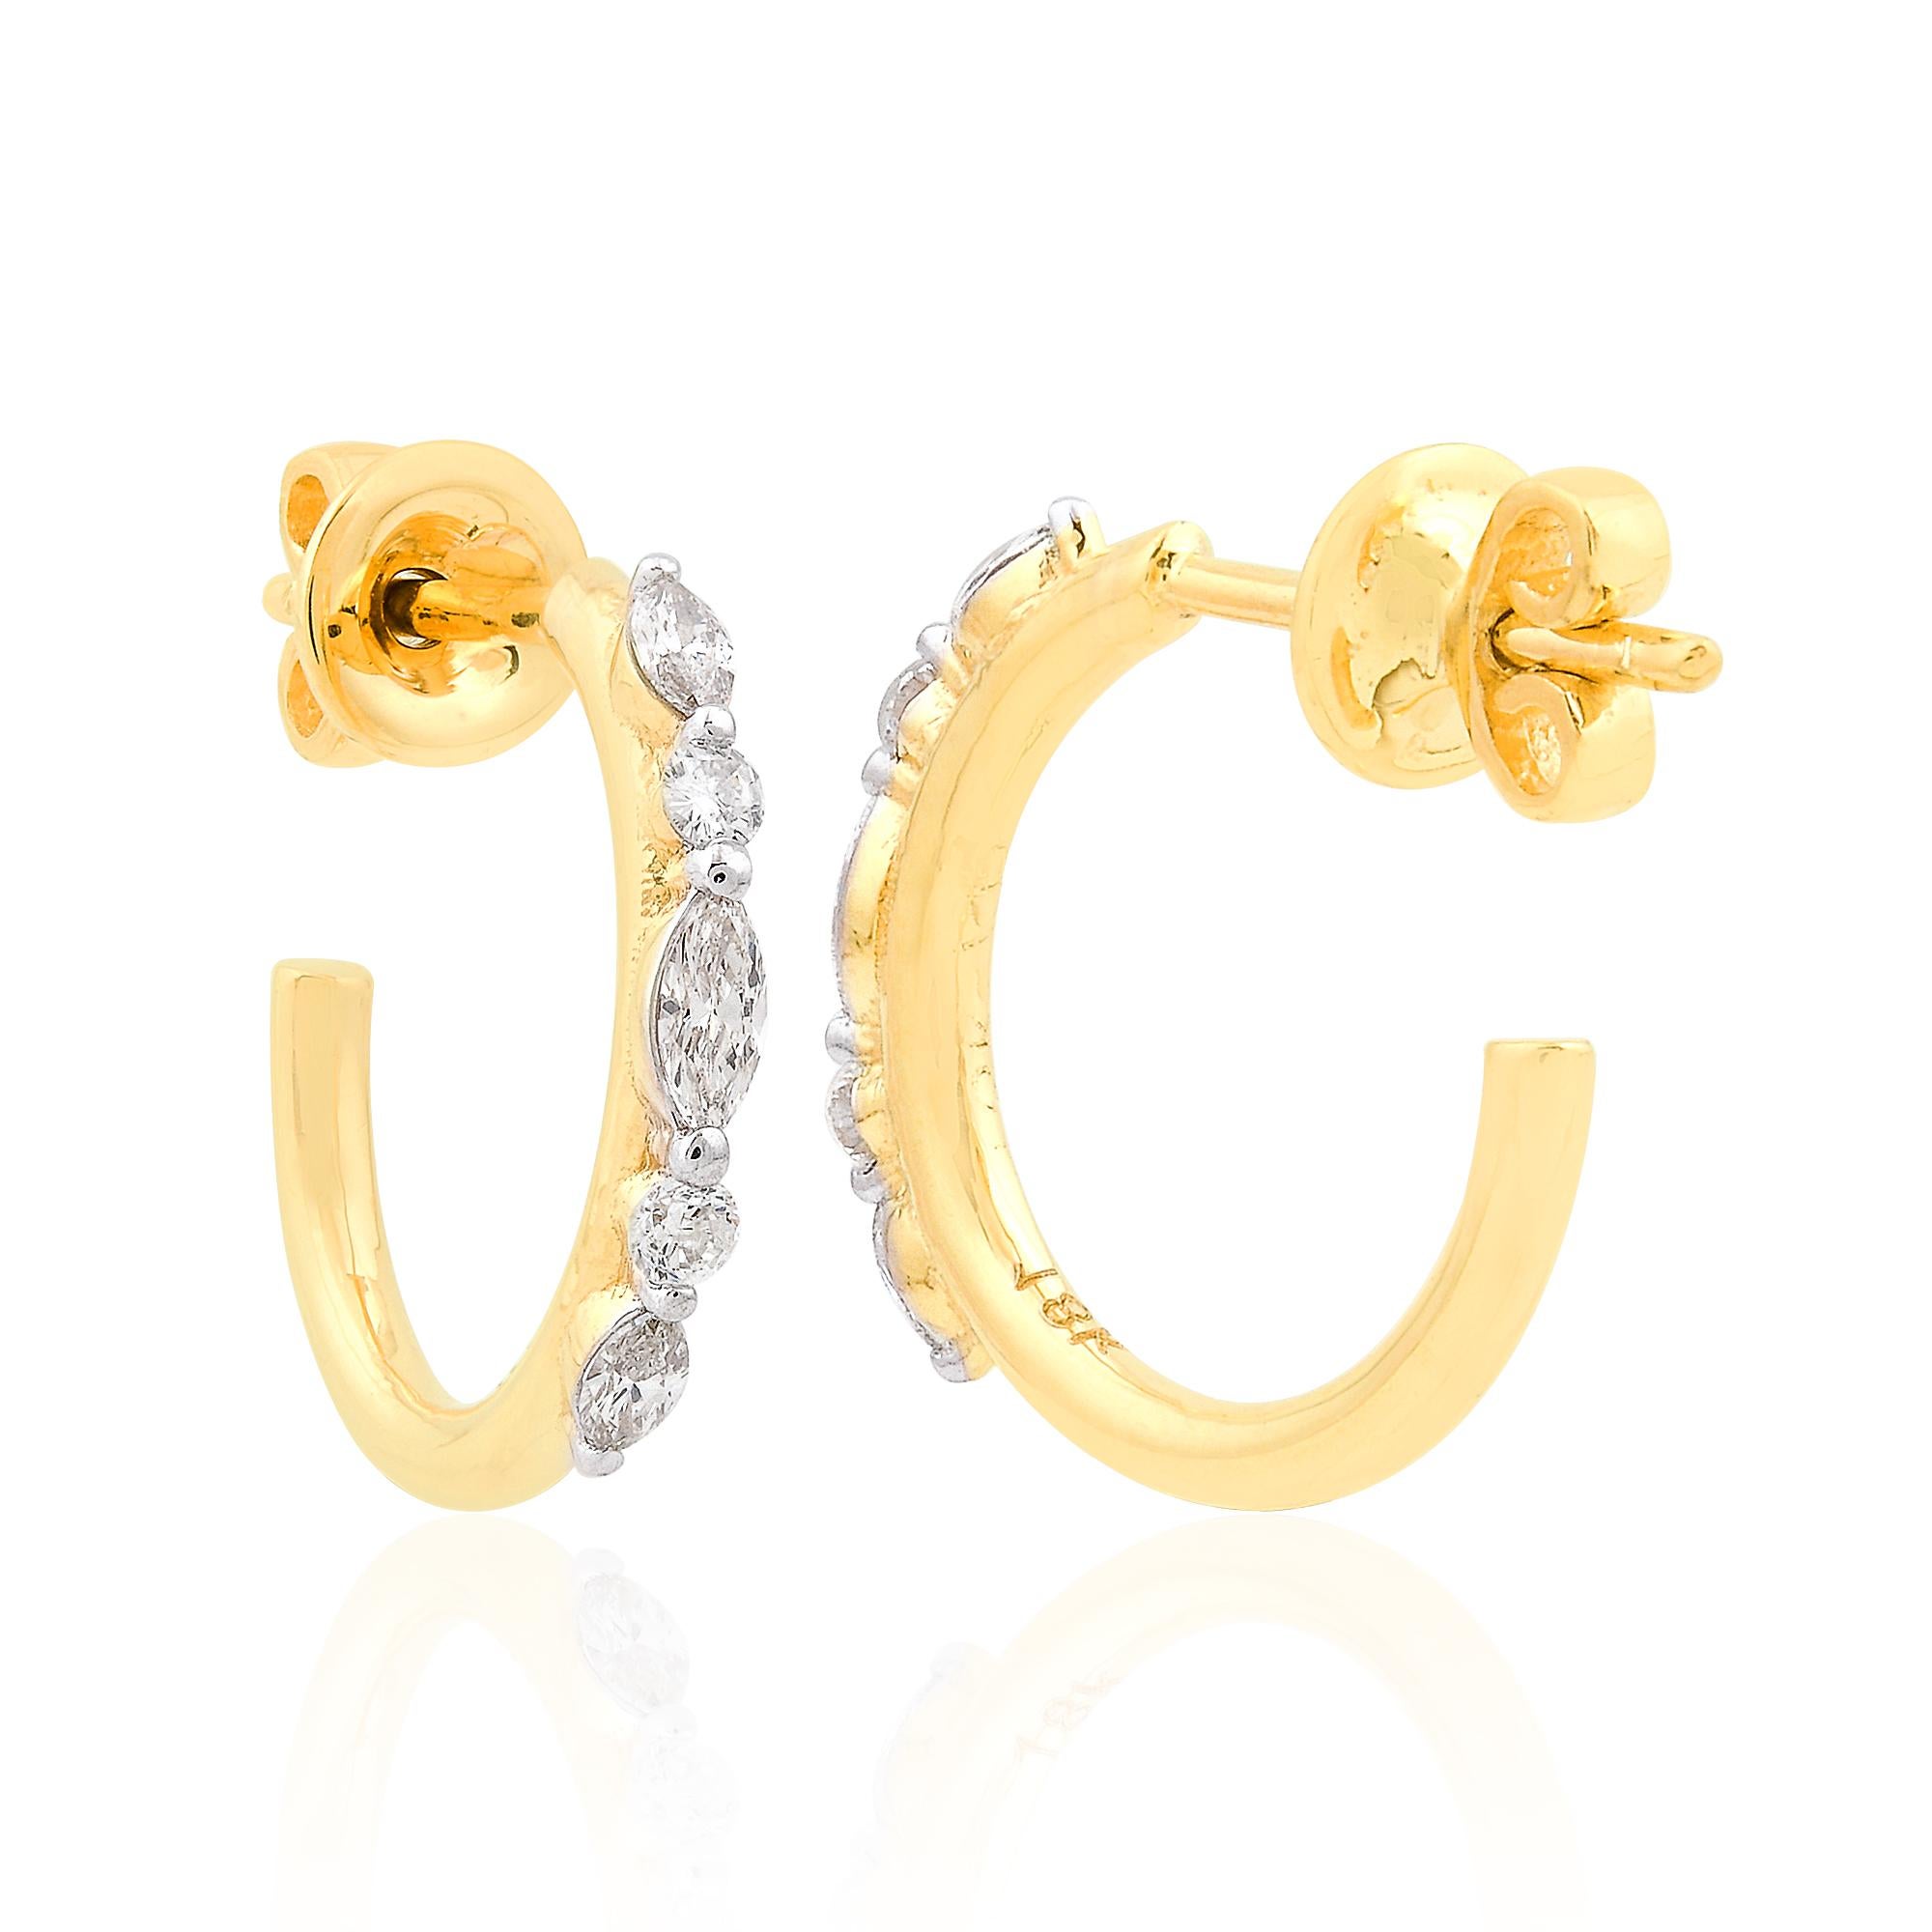 Item Code :- SEE-11657
Gross Weight :- 3.20 gm
18k Yellow Gold Weight :- 3.13 gm
Diamond Weight :- 0.33 carat  ( AVERAGE DIAMOND CLARITY SI1-SI2 & COLOR H-I )
Earrings Size :- 15 mm approx.
✦ Sizing
.....................
We can adjust most items to